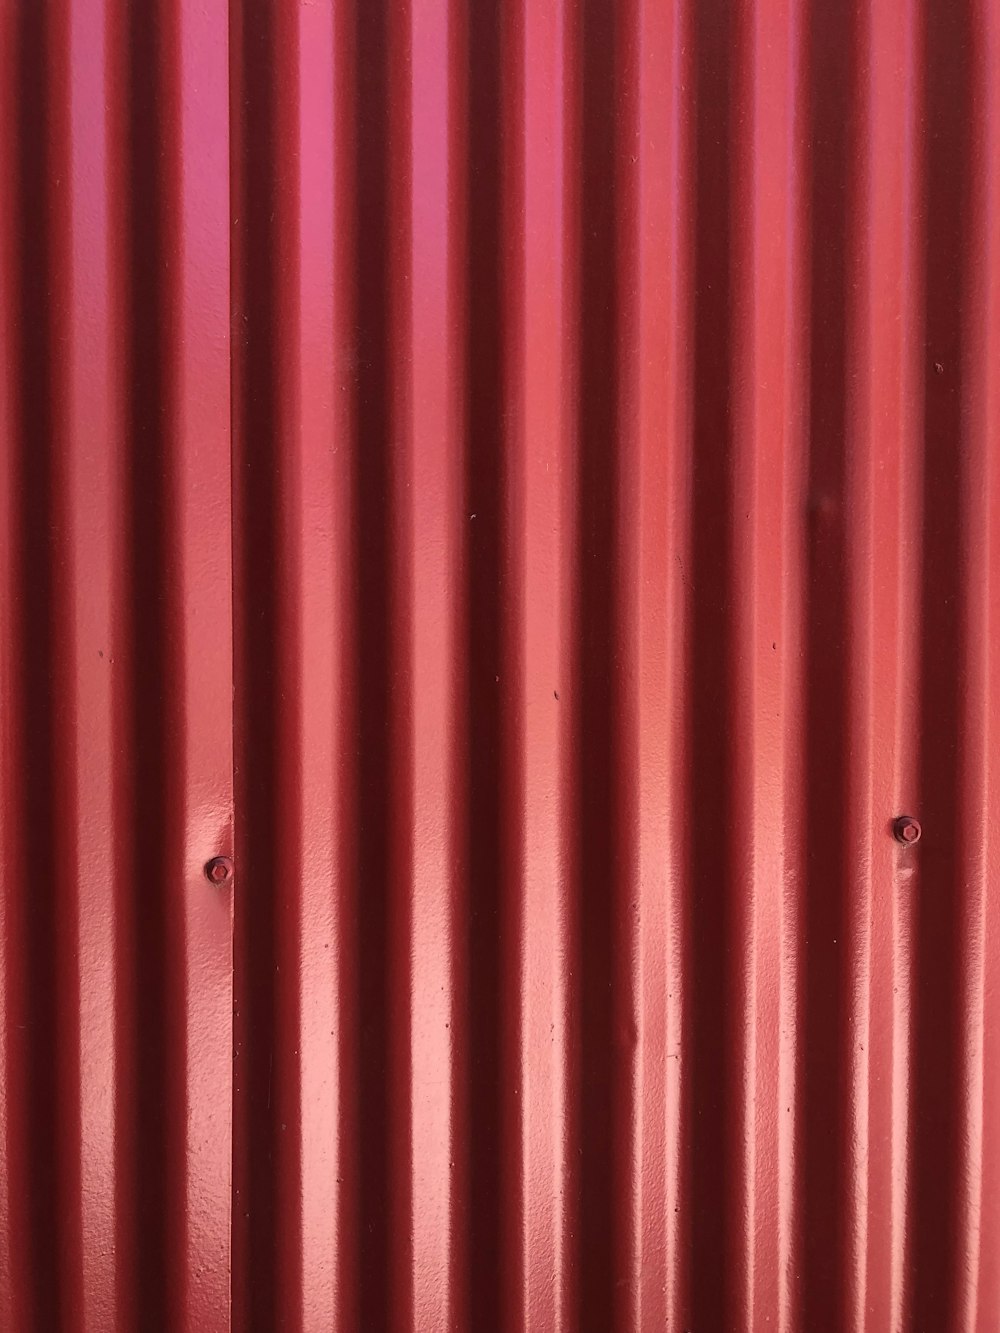 a close up of a red metal wall